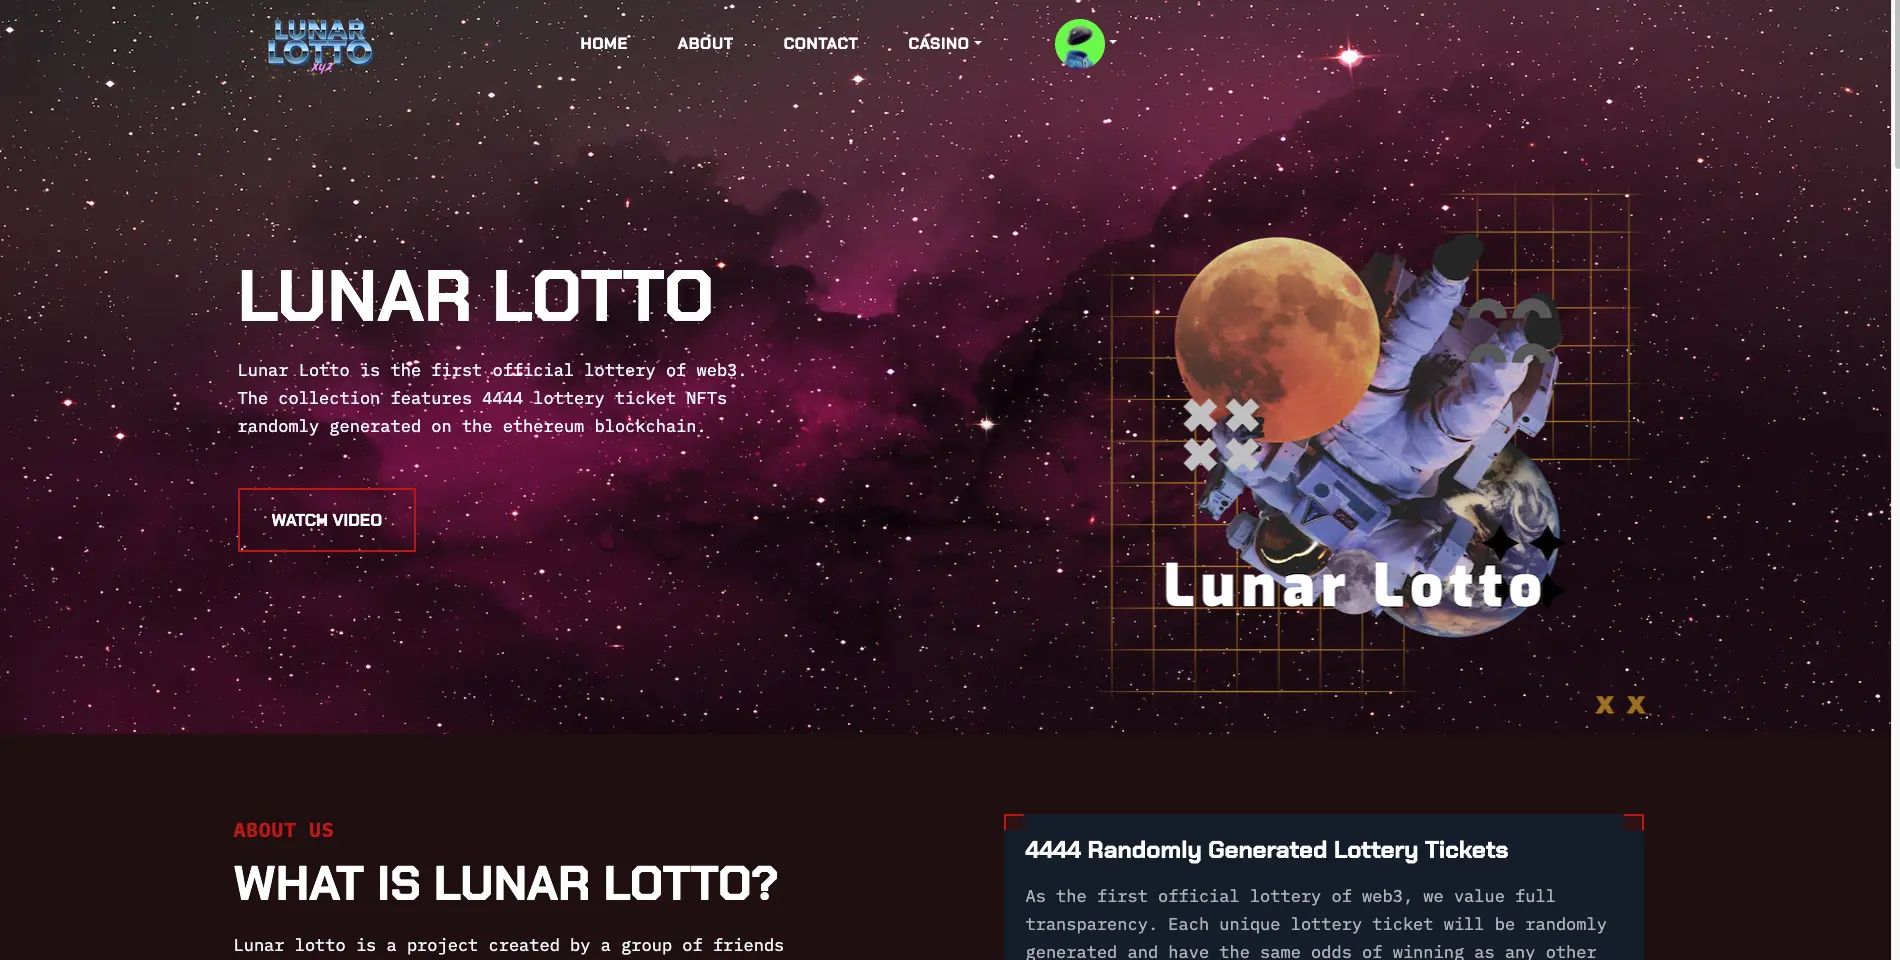 Website and casino games for Lunar Lotto NFT.